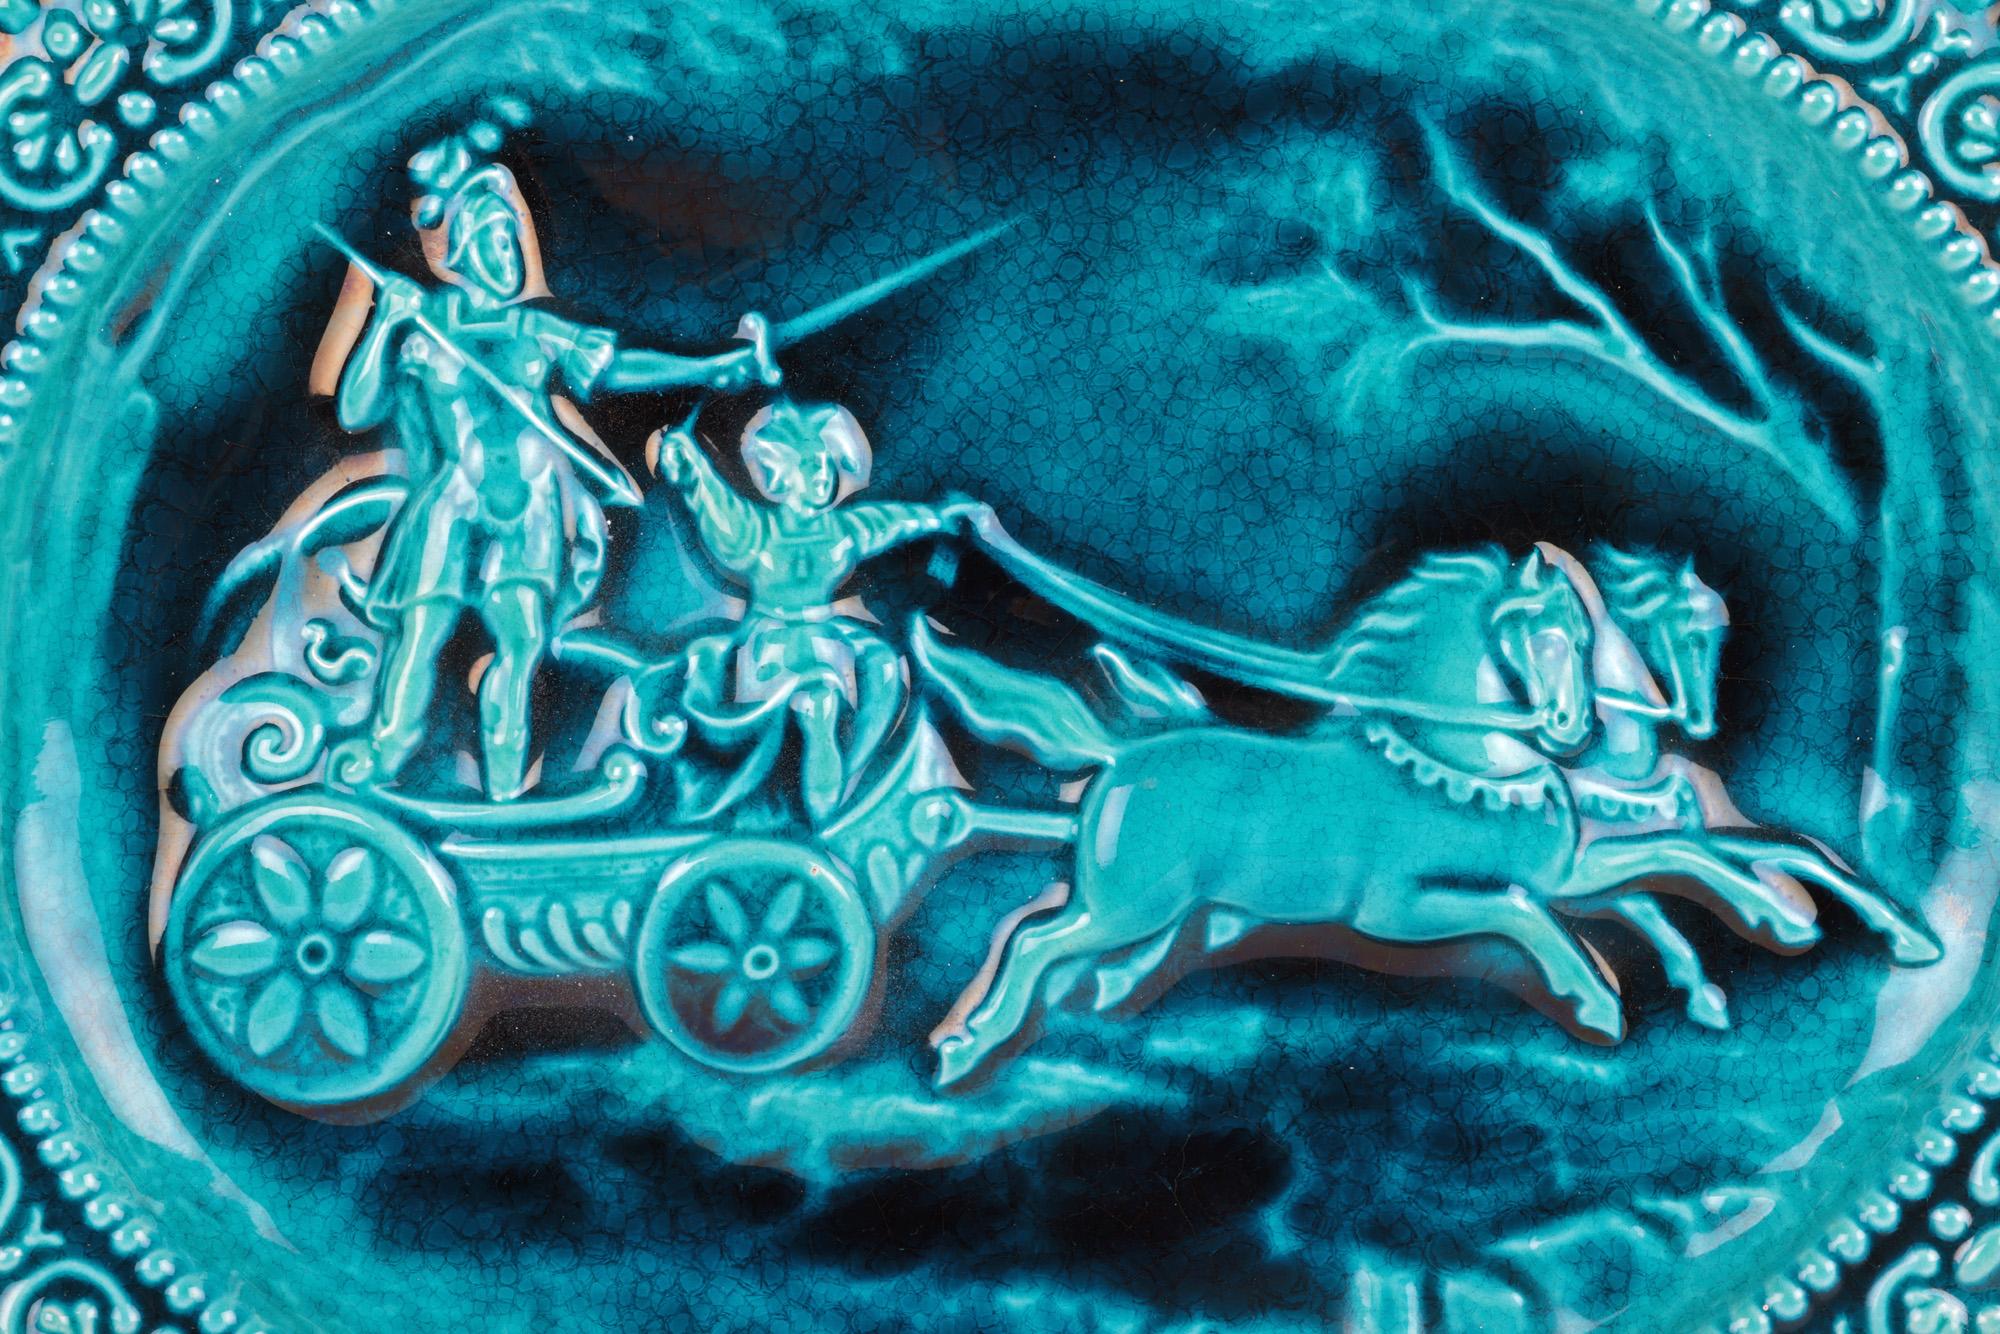 Maw & Co Walter Crane Majolica Chariot Art Pottery Plaque In Good Condition For Sale In Bishop's Stortford, Hertfordshire